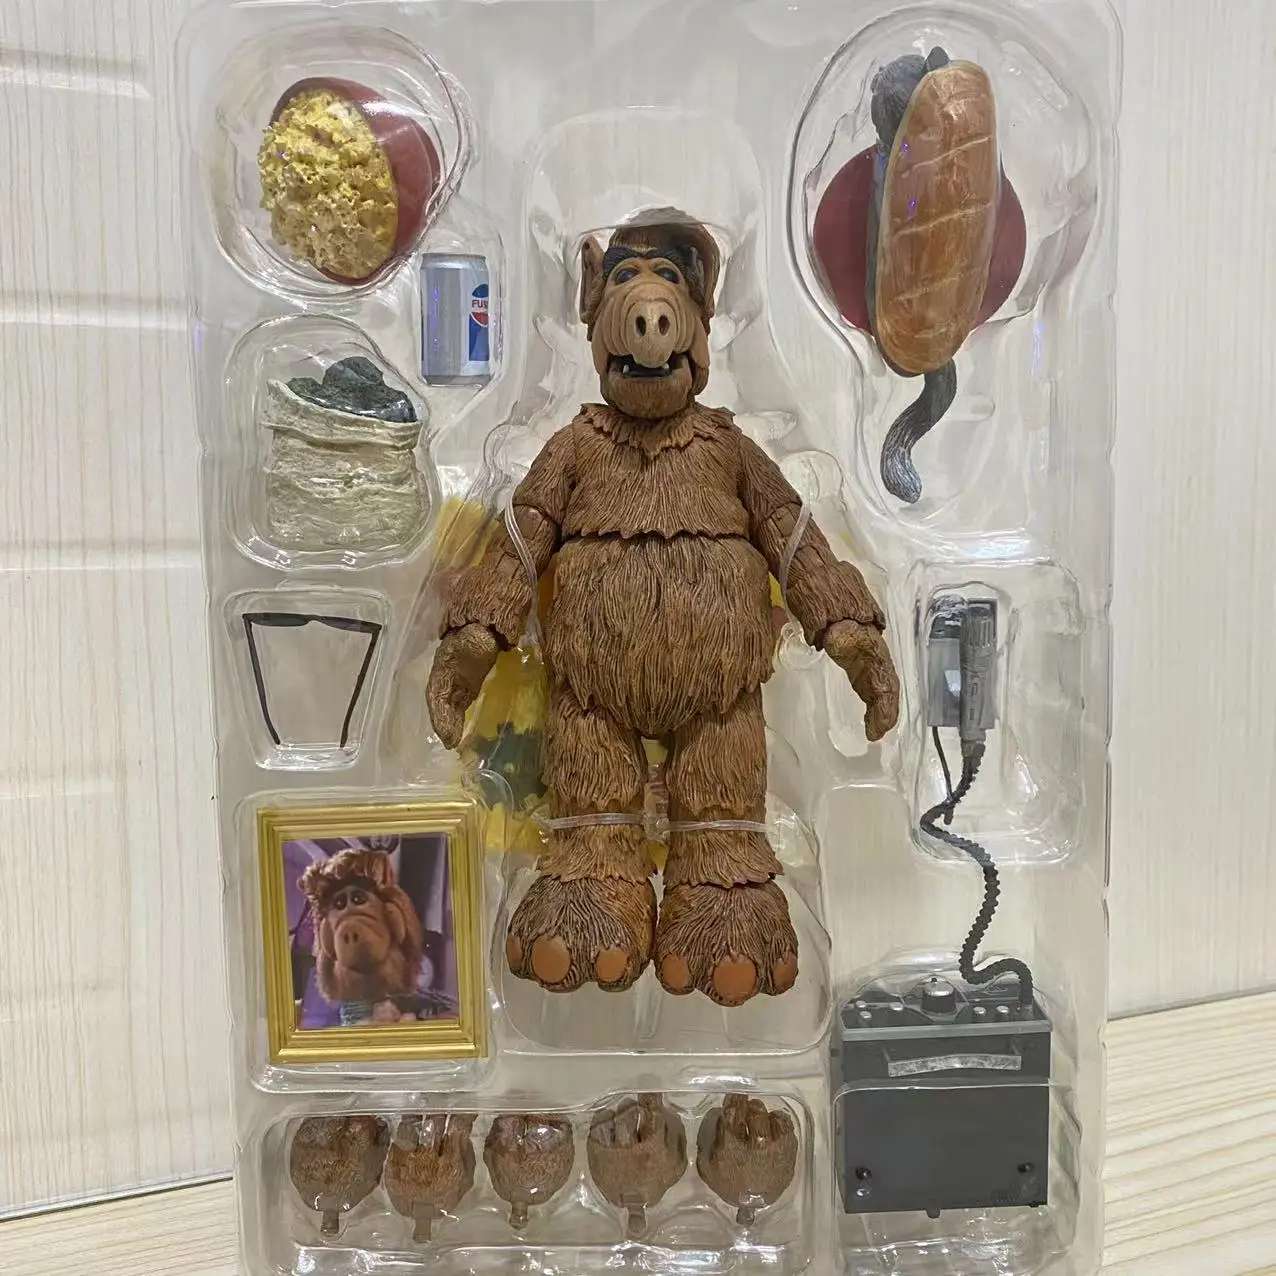 

Genuine In Stock Anime Figure Neca 45100 Has A 7-Inch Statue Ultimate Version Of Alf Action Figure Toys For Children Gifts